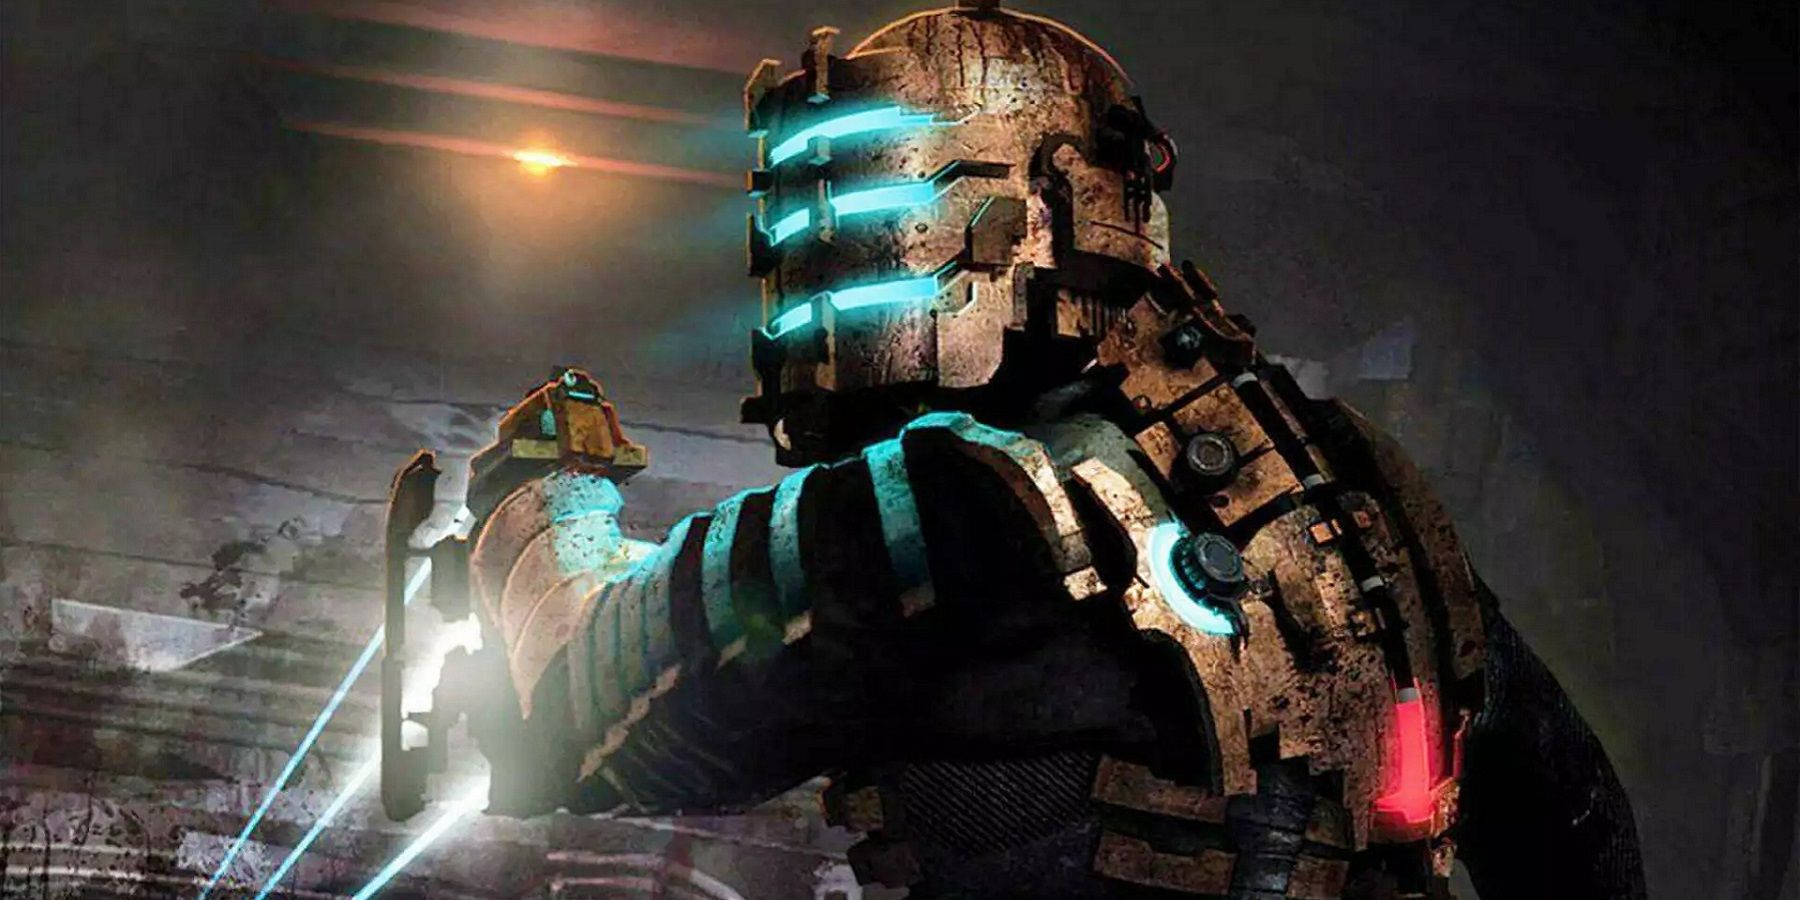 Image from Dead Space showing Isaac Clarke with his back to the camera.